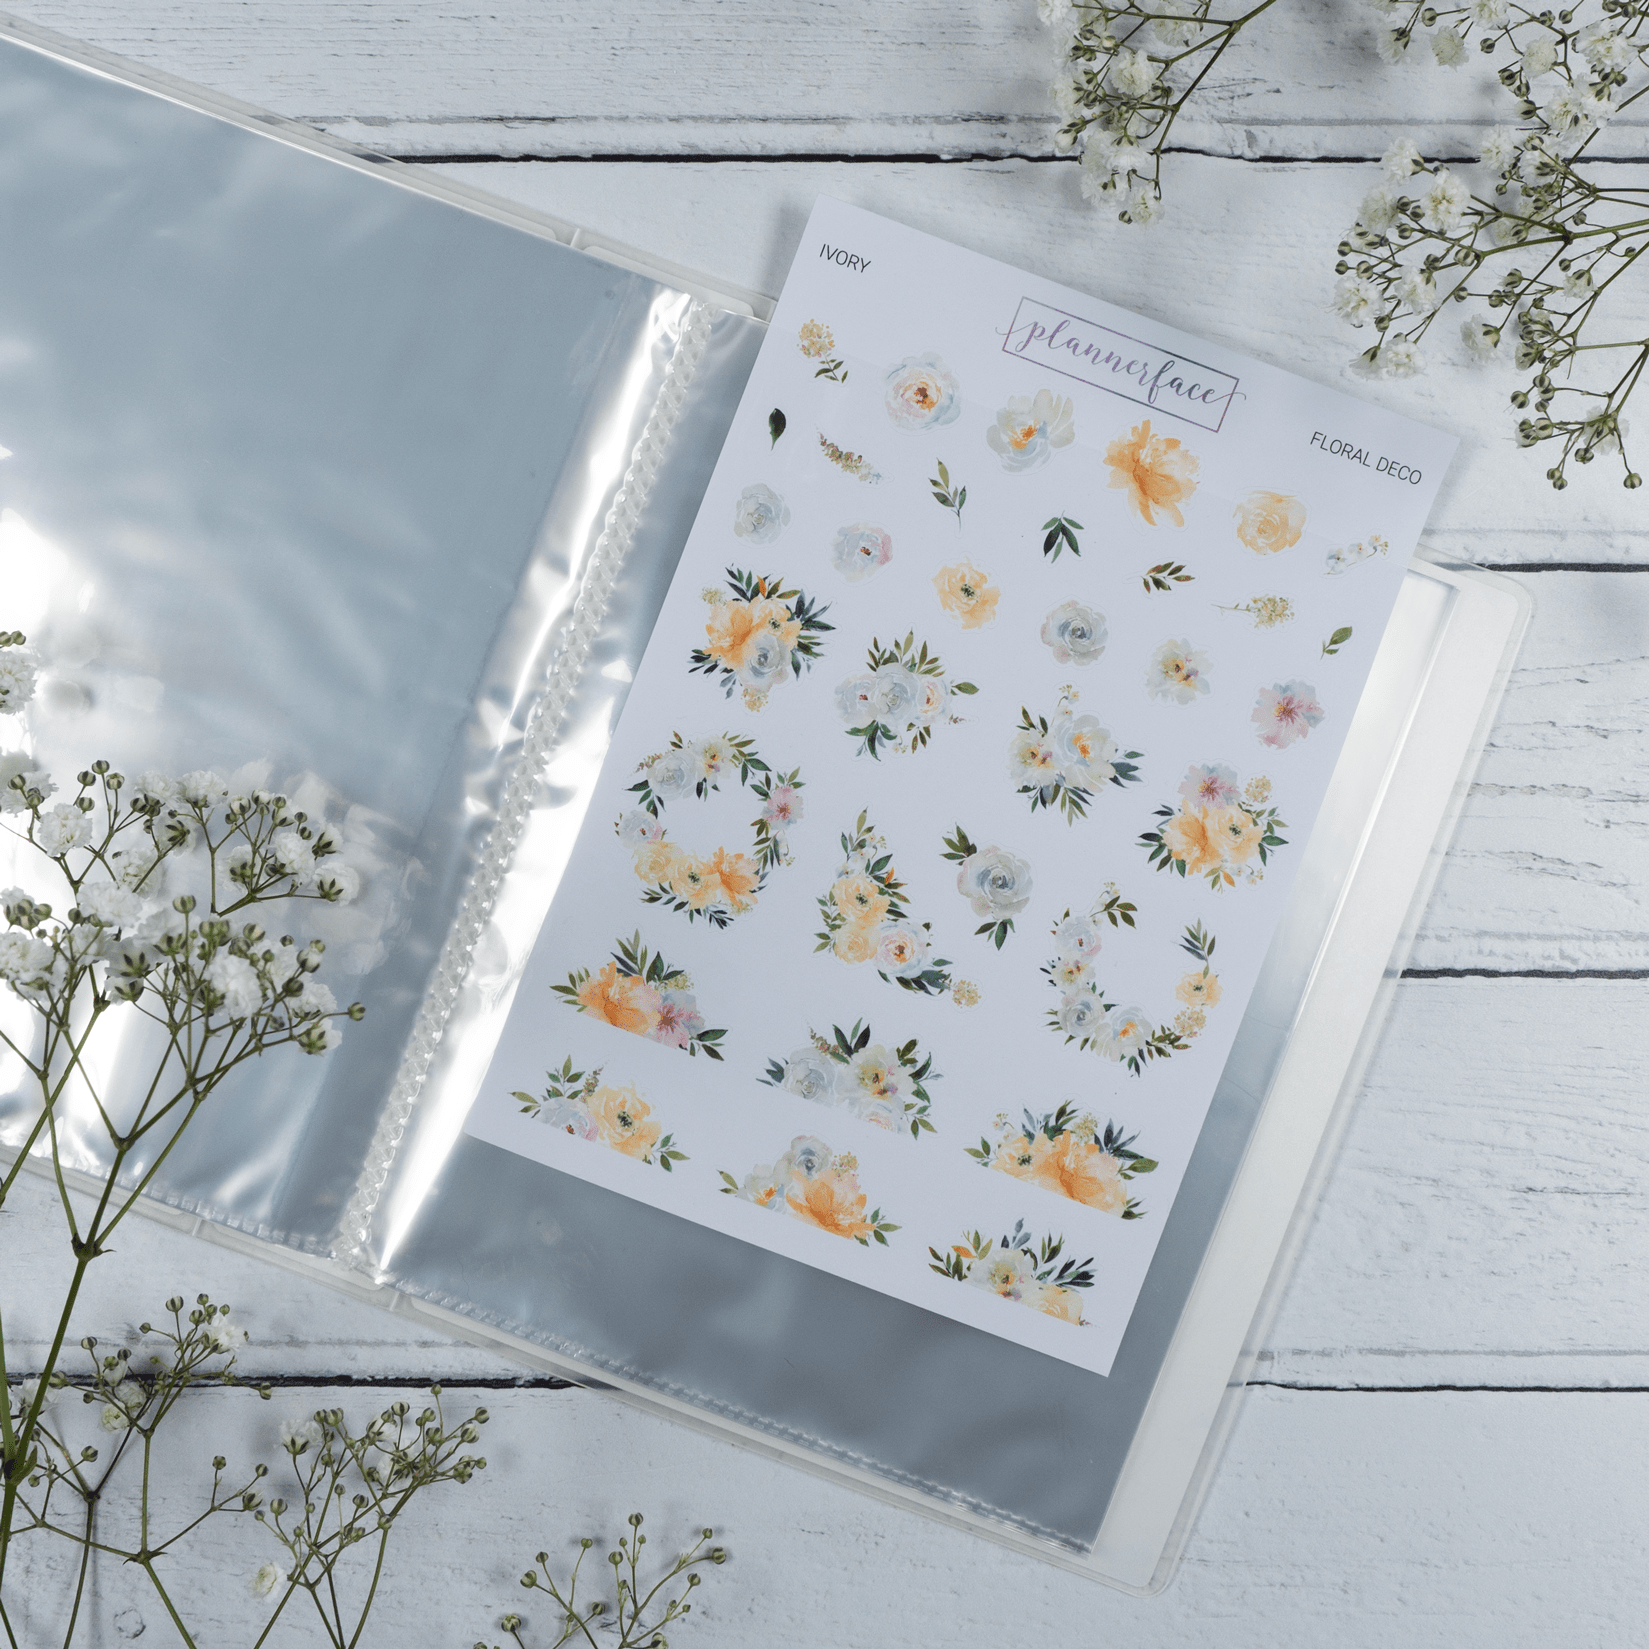 Wendy Sticker Album (Large) by Plannerface